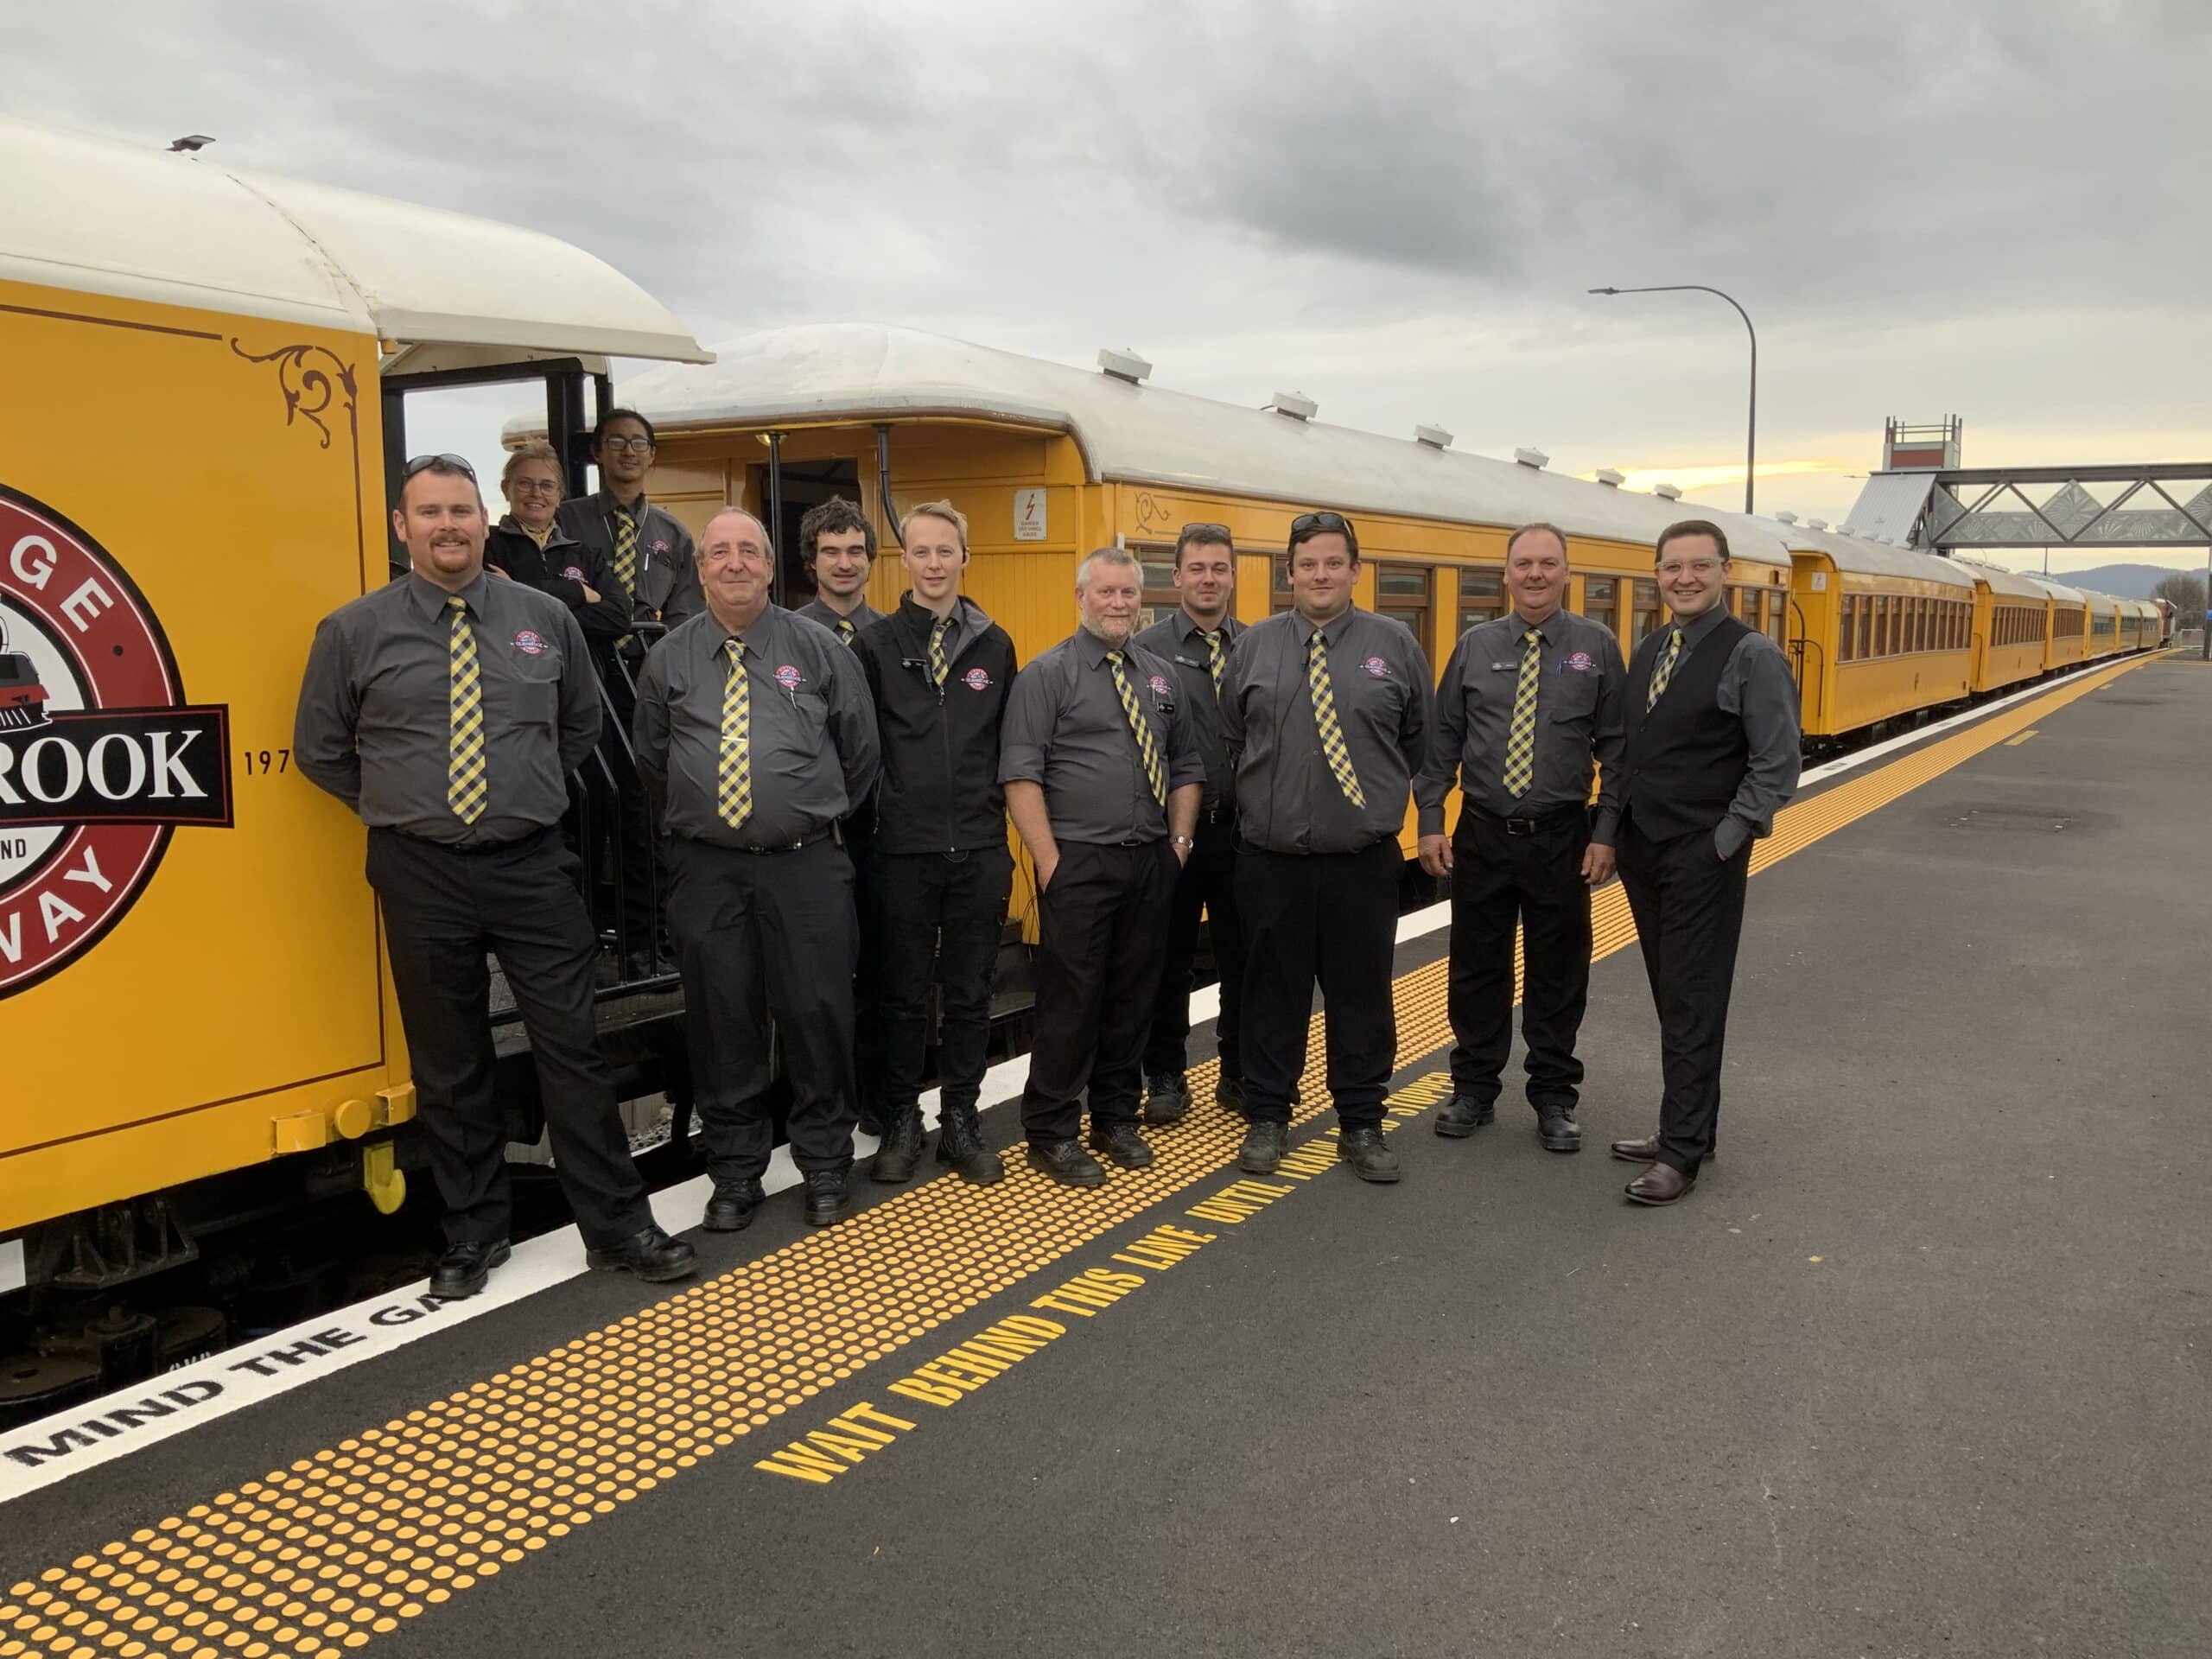 The train crew on the GVR Special